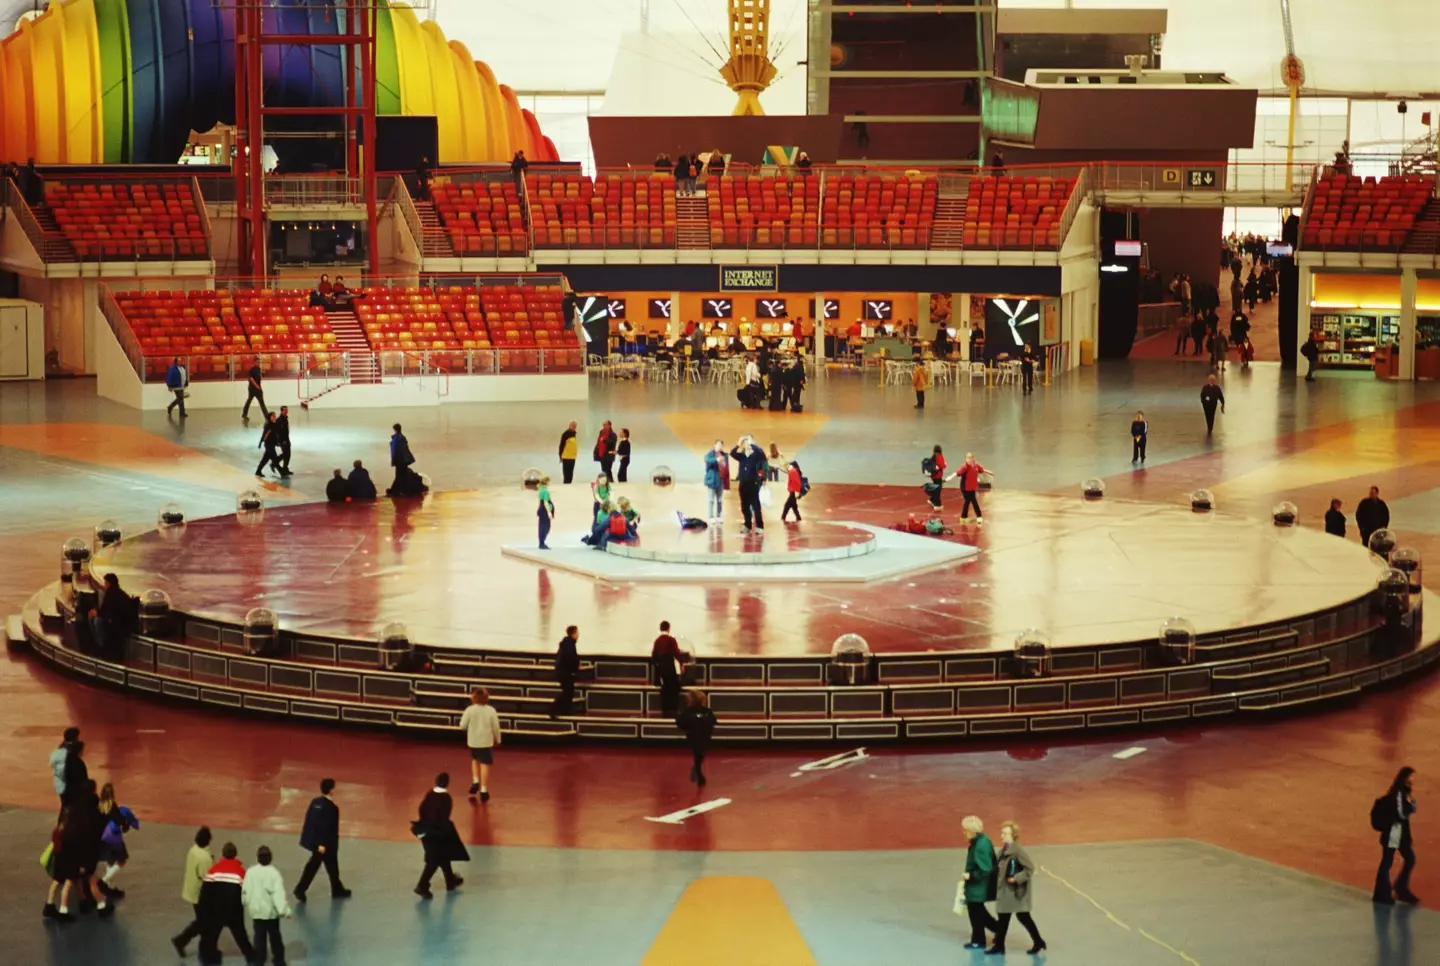 The middle of the Millennium Dome, which is now the O2 Arena. (Steve Eason/Hulton Archive/Getty Images)